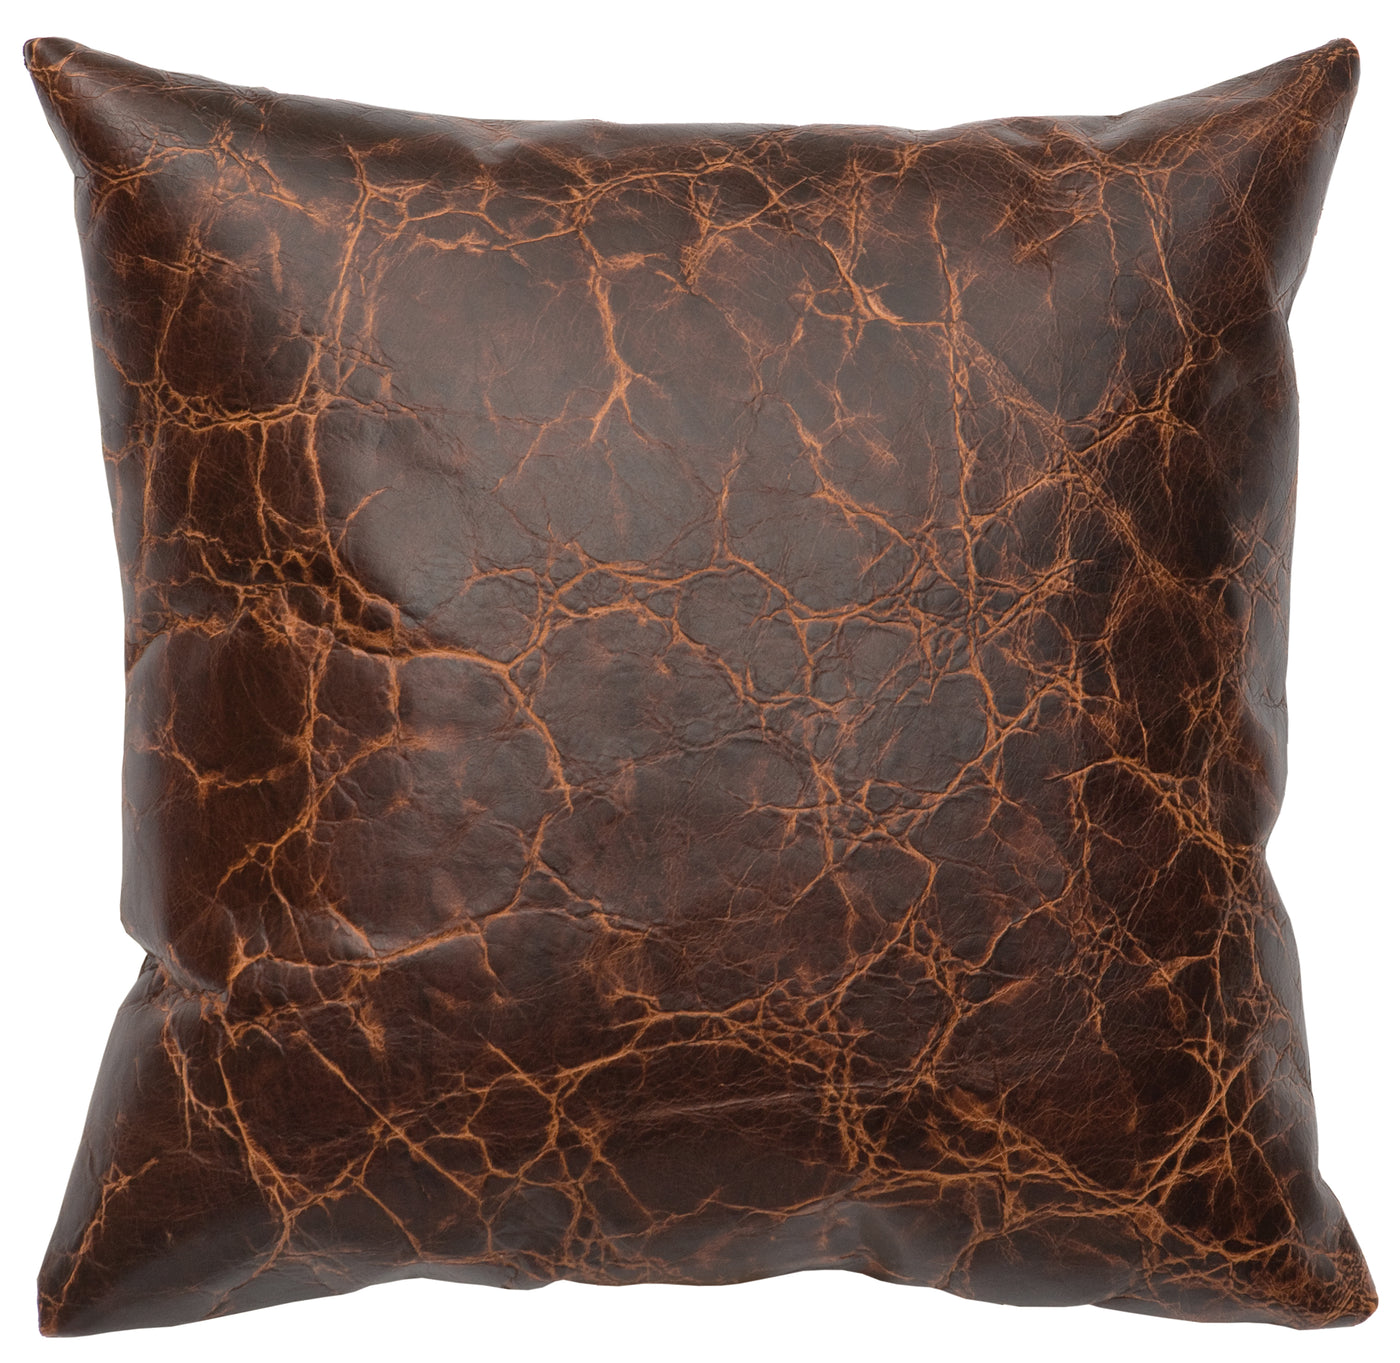 Canvello Timberlake Maple Leather Pillow - Fabric Back - 16" x 16"